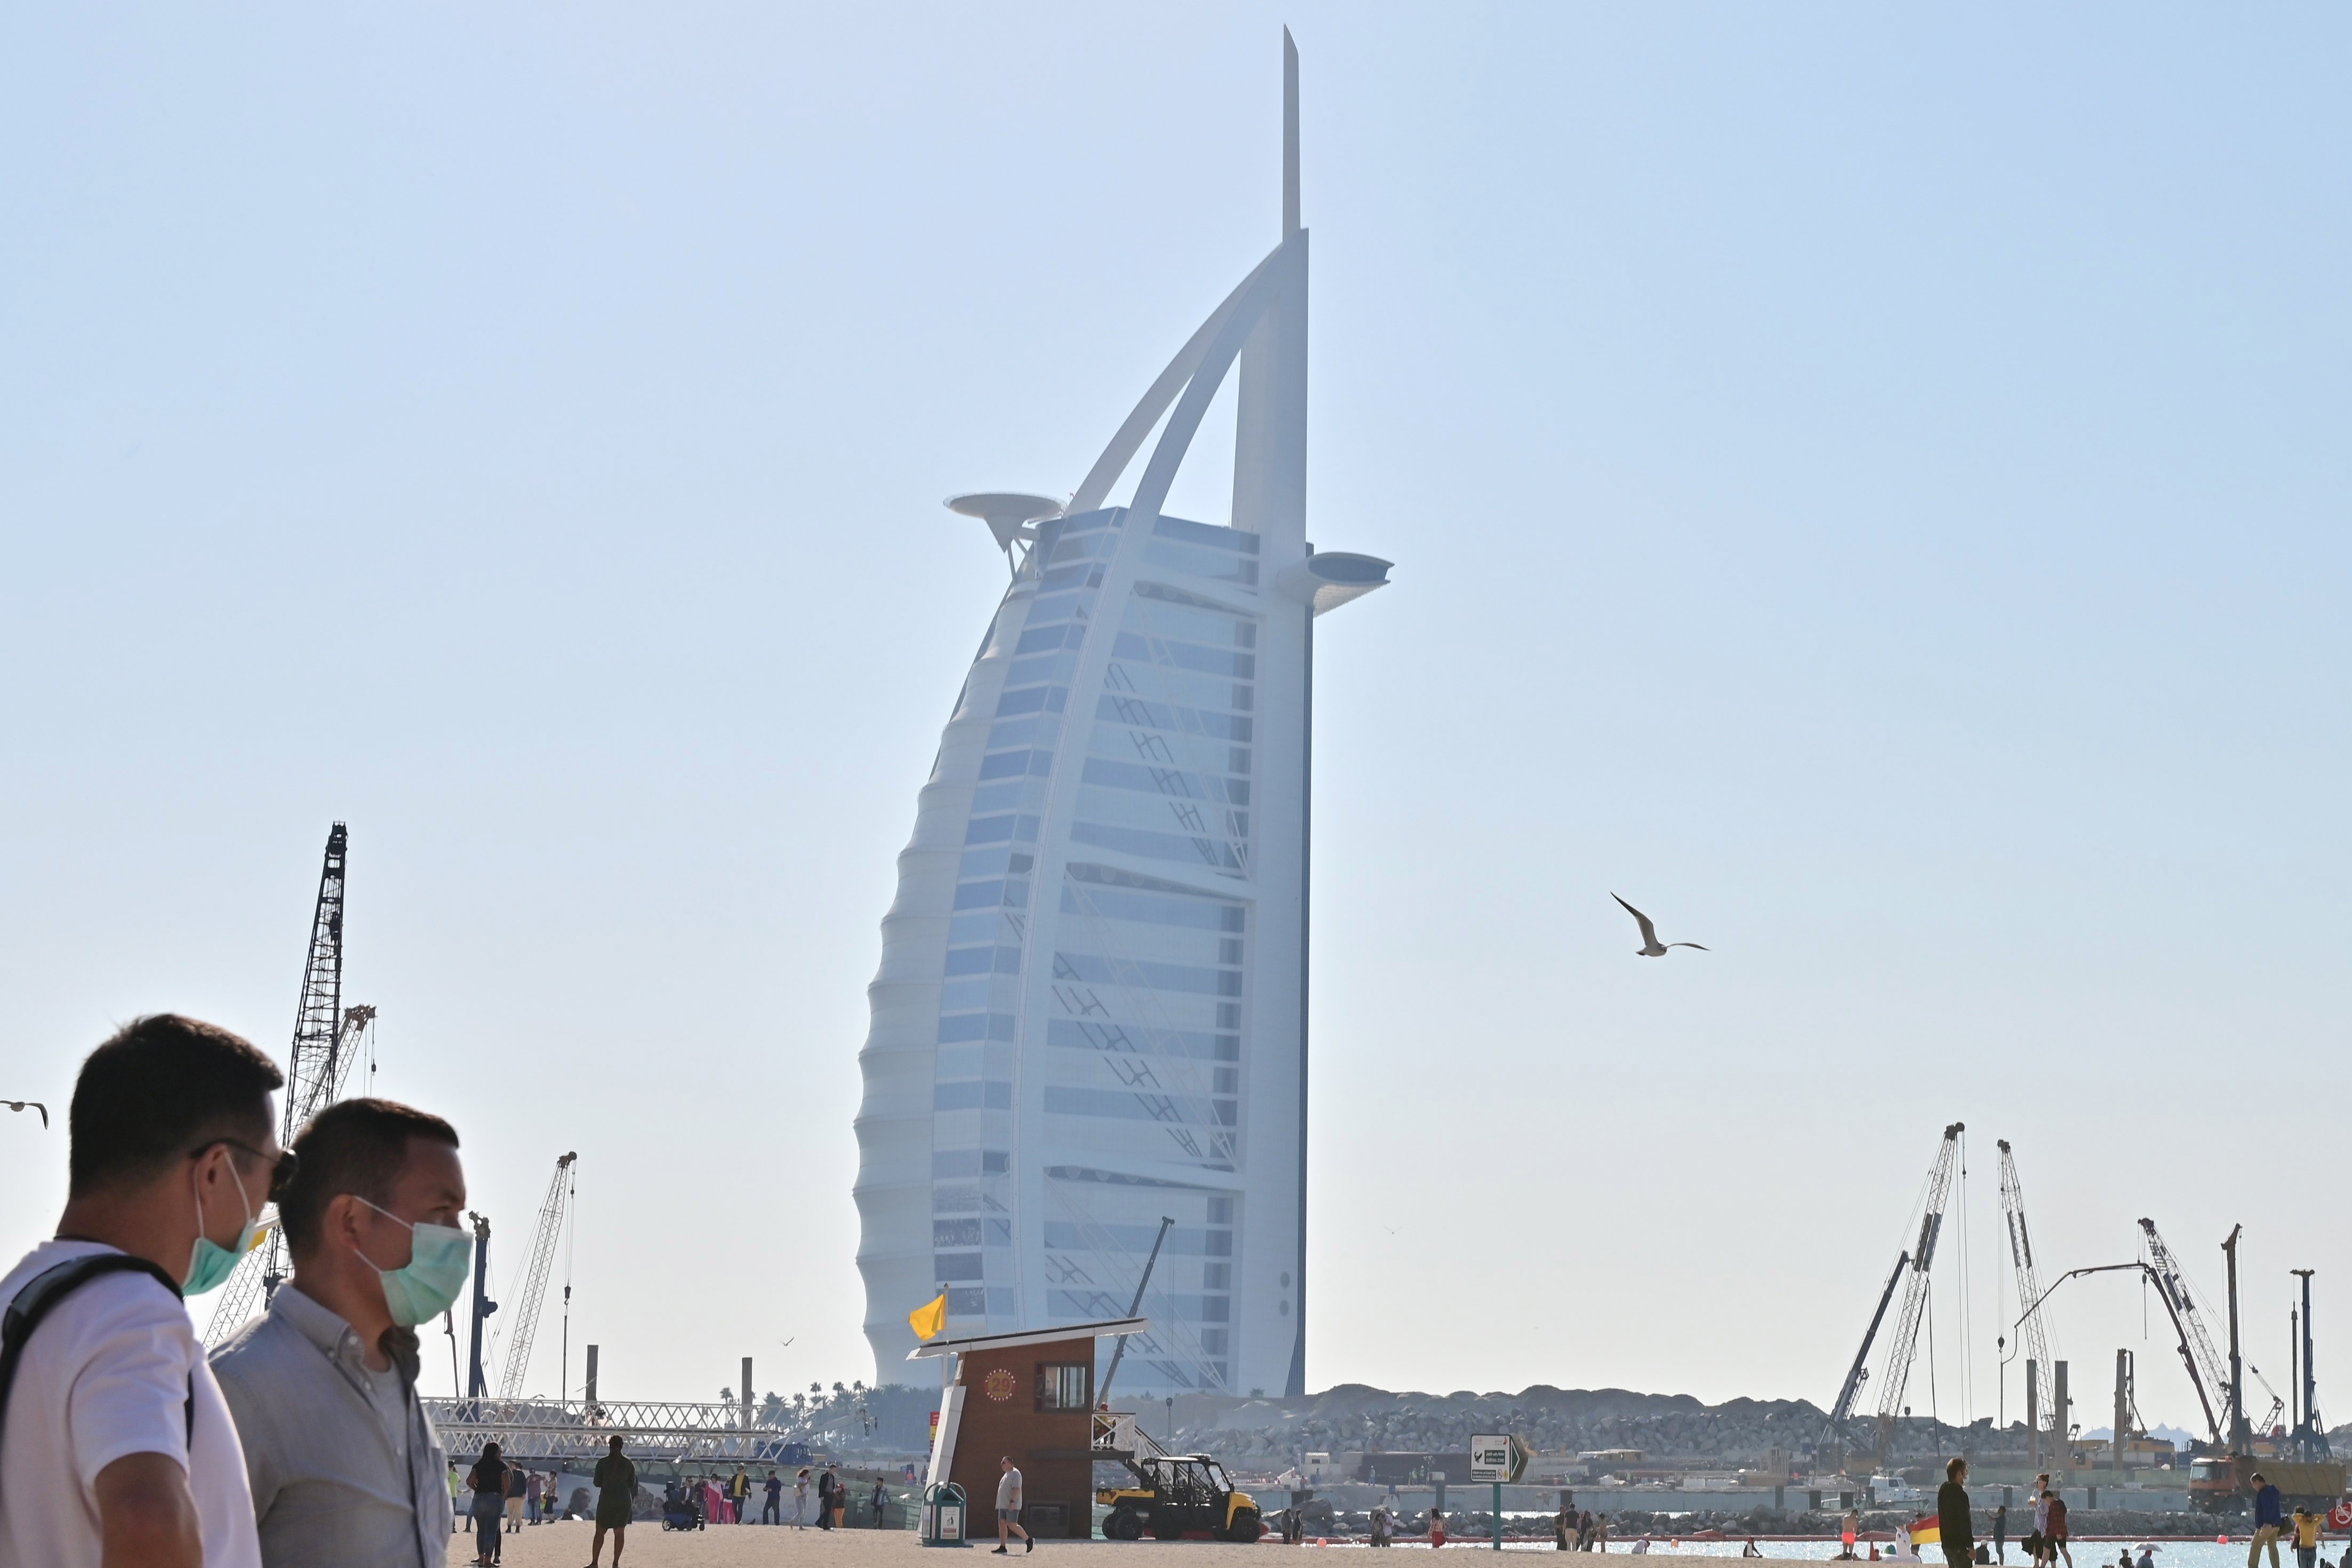 Chinese Tourists wearing surgical masks are pictured on a beach next to Burj Al Arab in Dubai on January 29 2020.